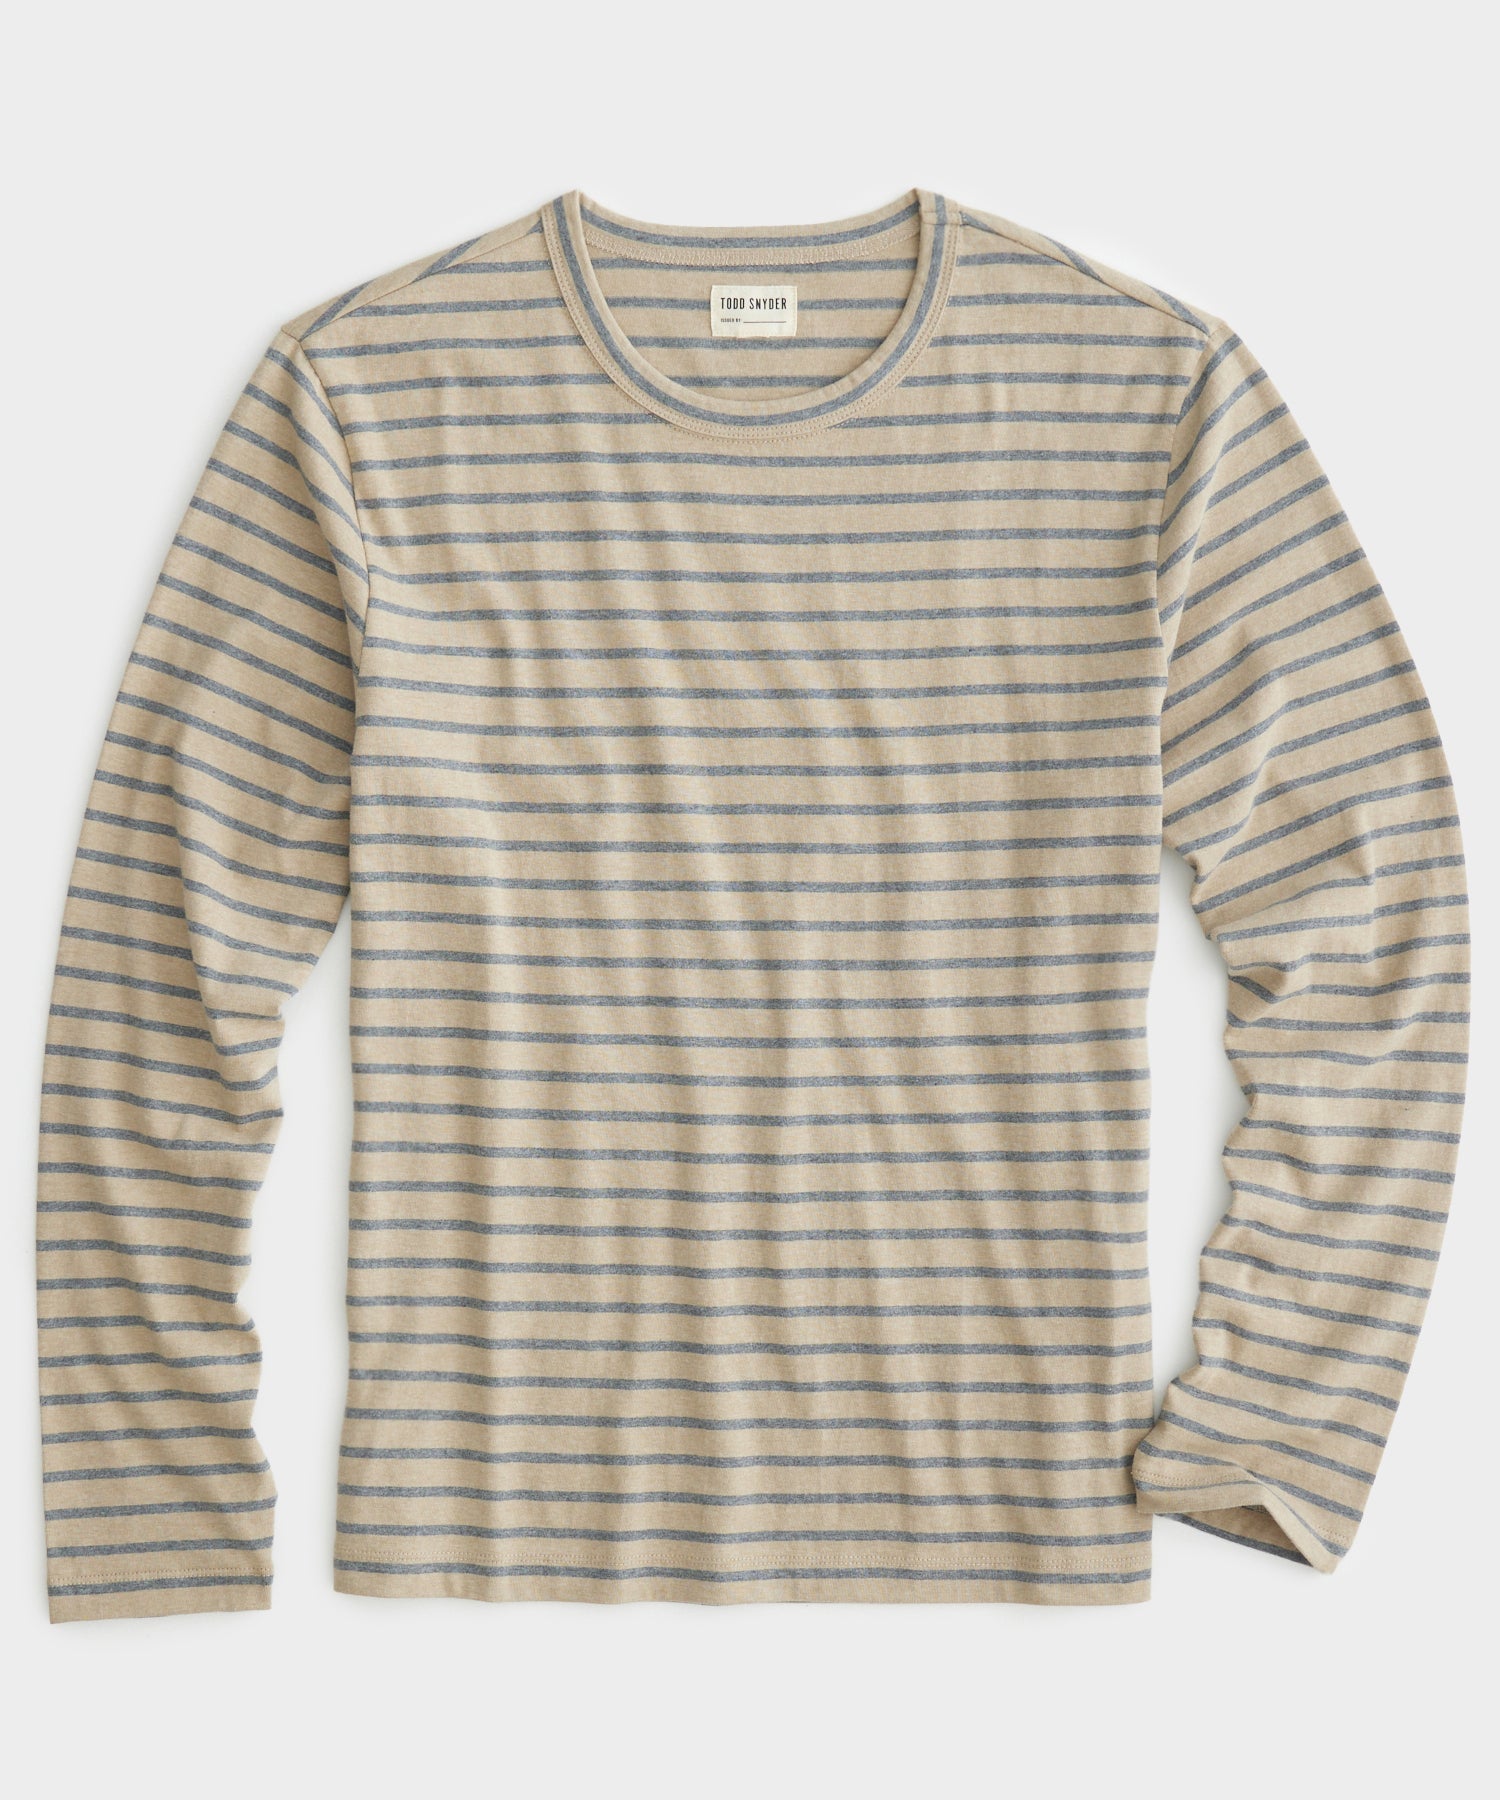 Issued By: Japanese Nautical Striped Tee in Slate Grey